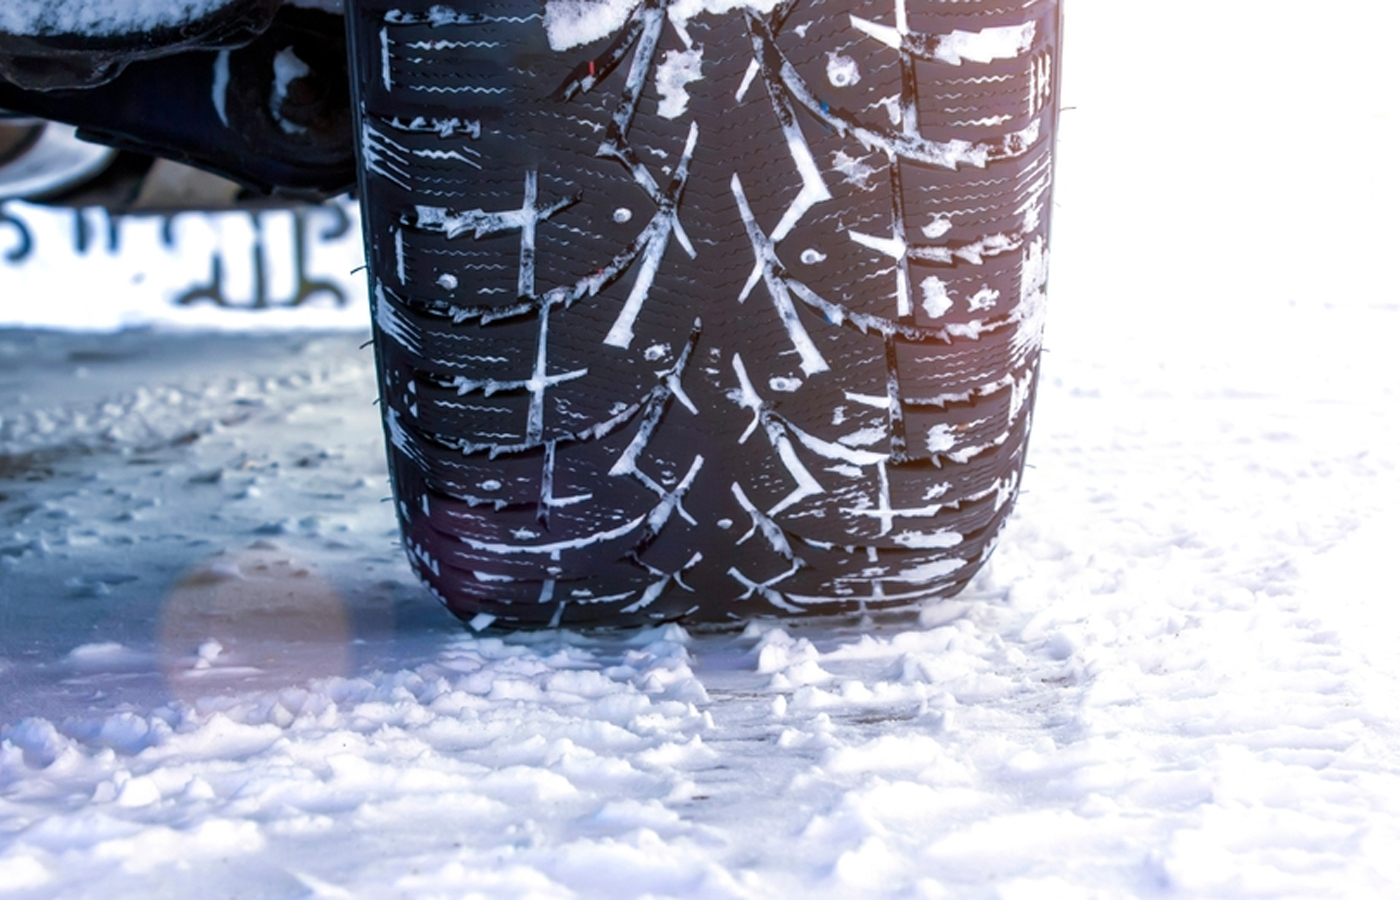 The Importance of Winter Tires